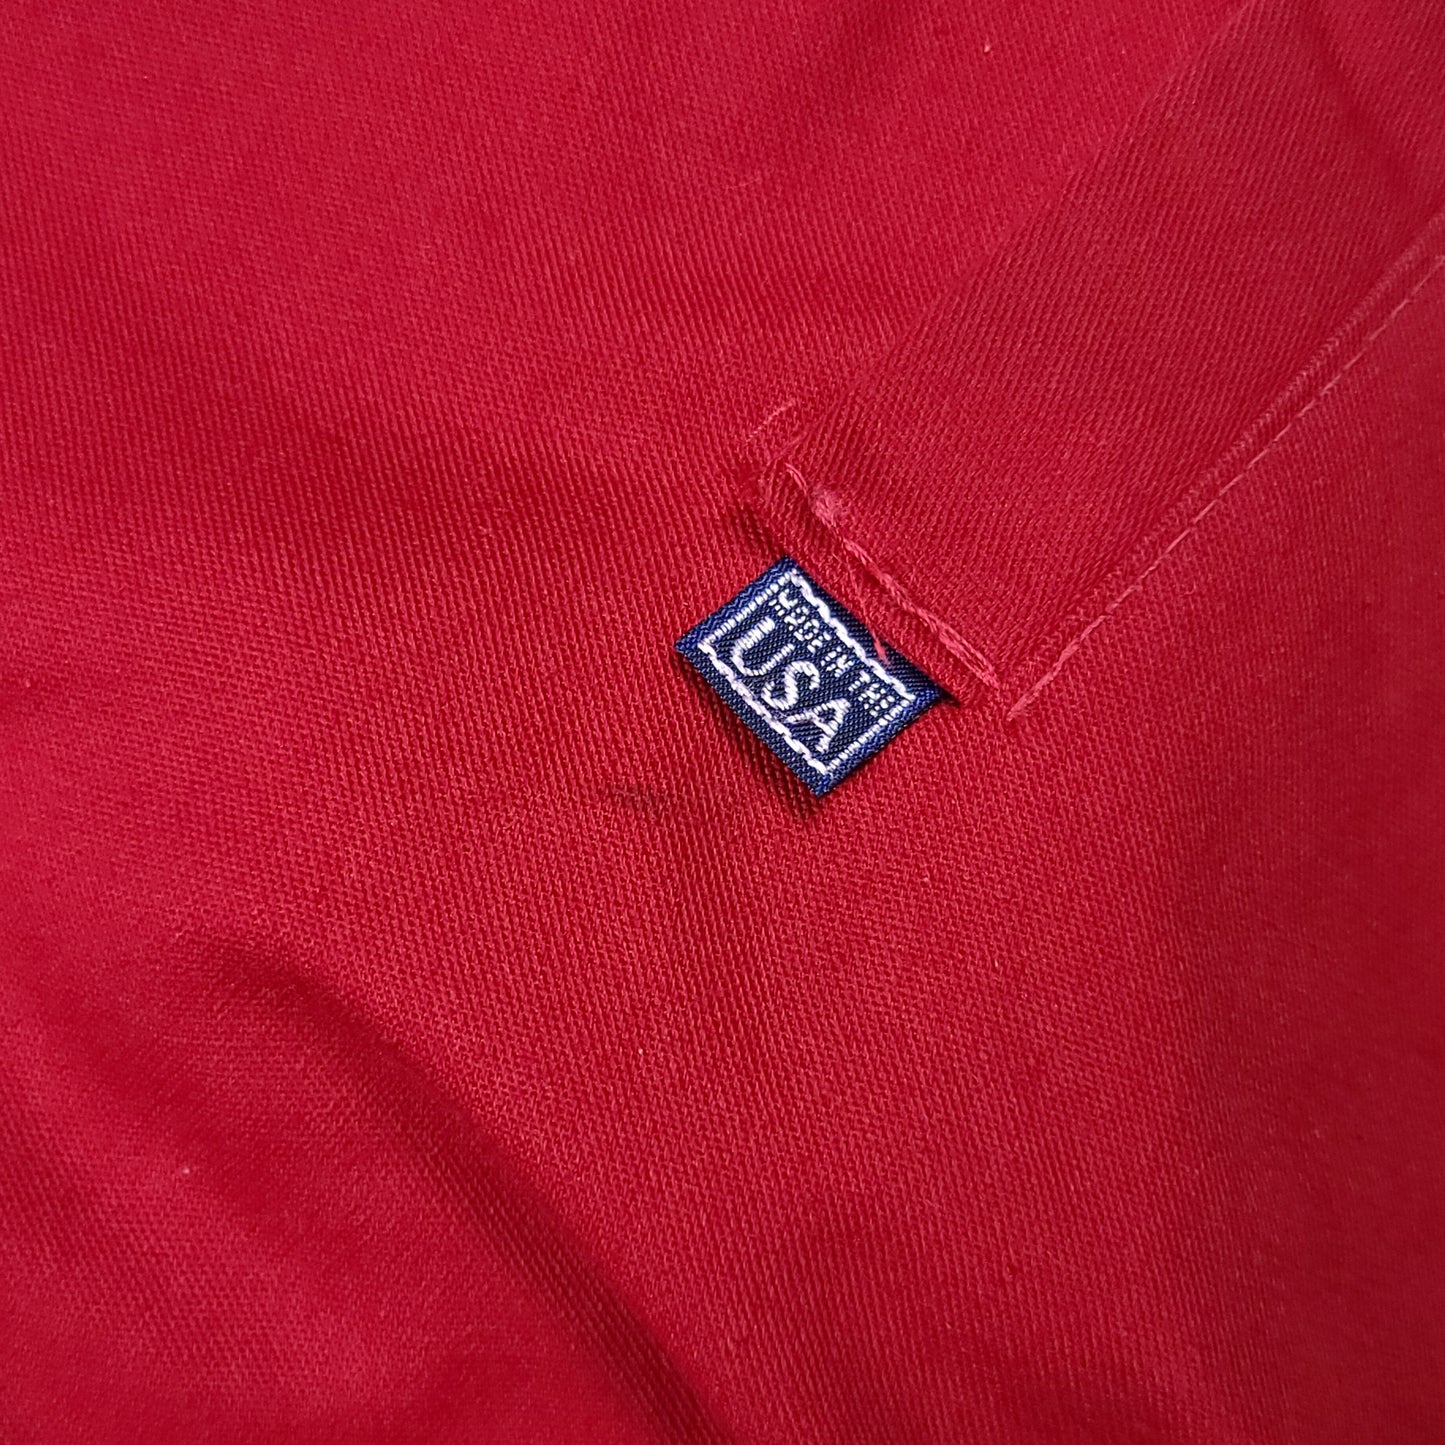 Vintage Carthage College Red Snap Button Jacket